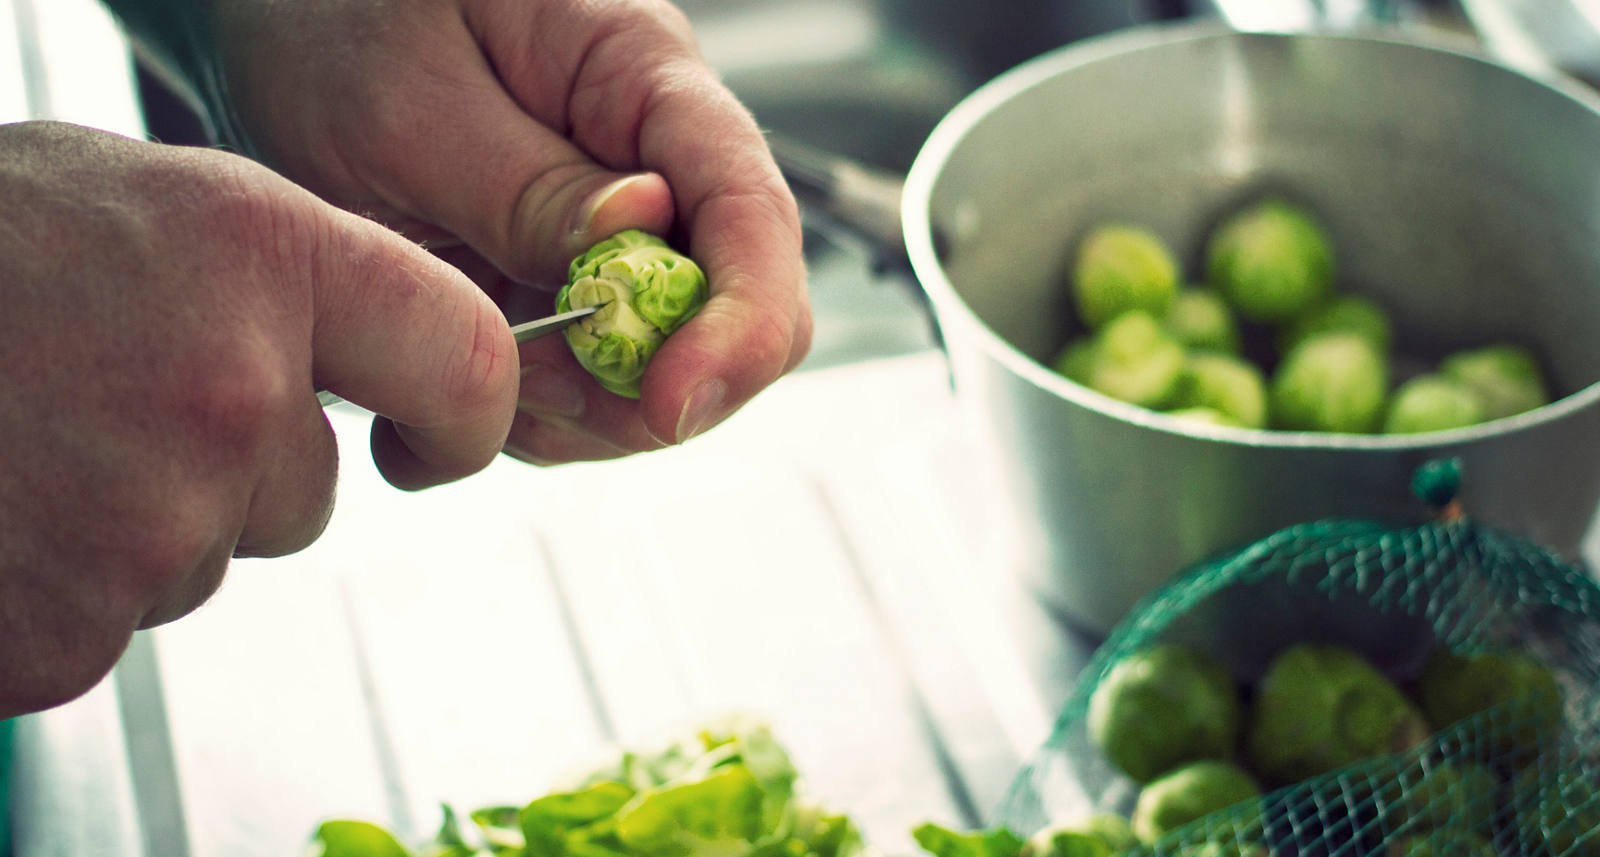 A man in the kitchen has washed a whole net of Brussels sprouts and is now preparing them with a knife